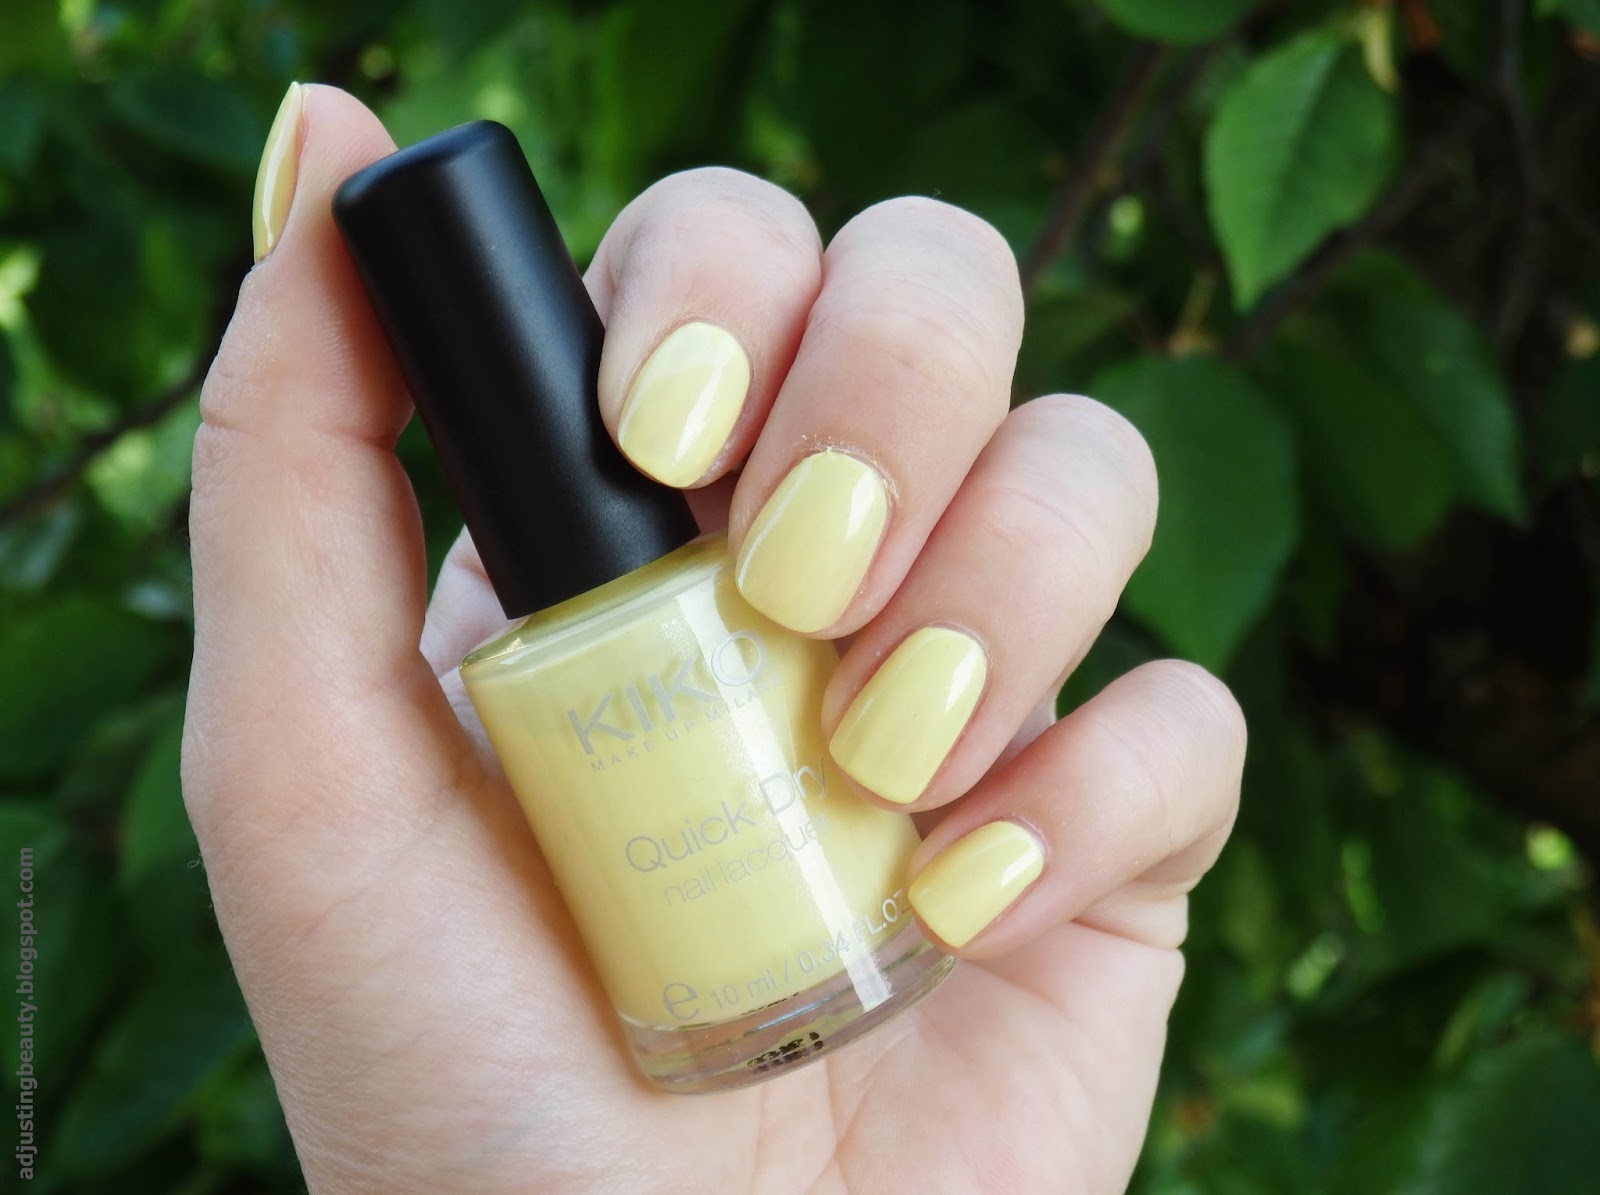 Review Kiko Quick Dry Nail Lacquer 853 Pearly Light Yellow Adjusting Beauty